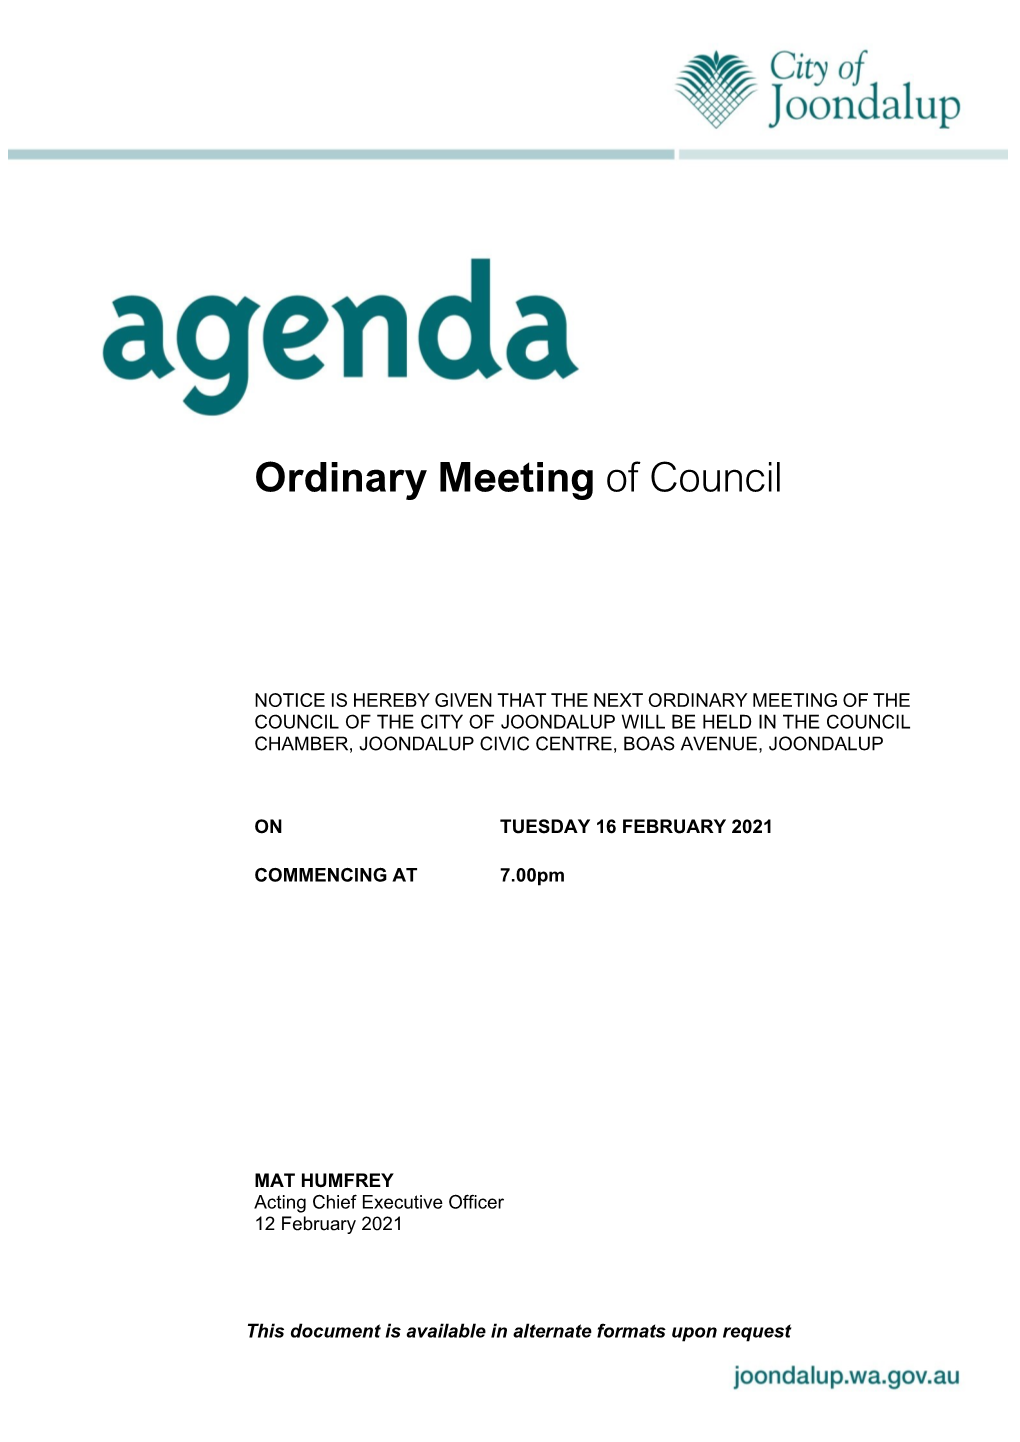 Ordinary Meeting of Council